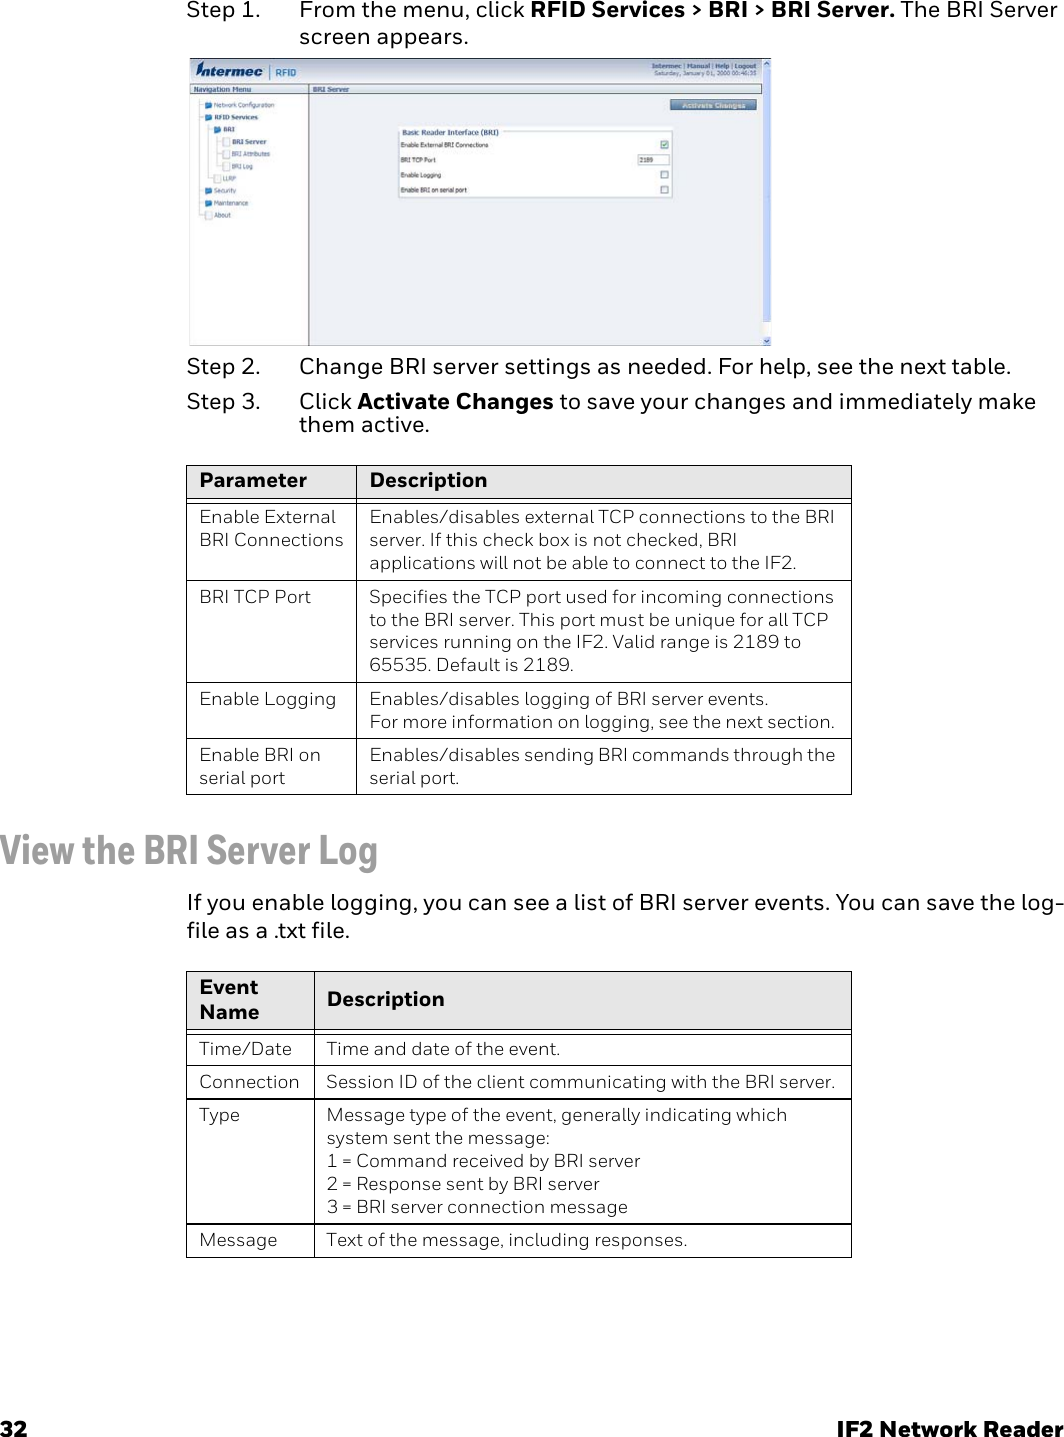 32 IF2 Network ReaderStep 1. From the menu, click RFID Services &gt; BRI &gt; BRI Server. The BRI Server screen appears.Step 2. Change BRI server settings as needed. For help, see the next table.Step 3. Click Activate Changes to save your changes and immediately make them active. View the BRI Server LogIf you enable logging, you can see a list of BRI server events. You can save the log-file as a .txt file.Parameter DescriptionEnable External BRI ConnectionsEnables/disables external TCP connections to the BRI server. If this check box is not checked, BRI applications will not be able to connect to the IF2.BRI TCP Port Specifies the TCP port used for incoming connections to the BRI server. This port must be unique for all TCP services running on the IF2. Valid range is 2189 to 65535. Default is 2189.Enable Logging Enables/disables logging of BRI server events.For more information on logging, see the next section.Enable BRI on serial portEnables/disables sending BRI commands through the serial port.Event Name DescriptionTime/Date Time and date of the event.Connection Session ID of the client communicating with the BRI server.Type Message type of the event, generally indicating which system sent the message:1 = Command received by BRI server2 = Response sent by BRI server3 = BRI server connection messageMessage Text of the message, including responses.